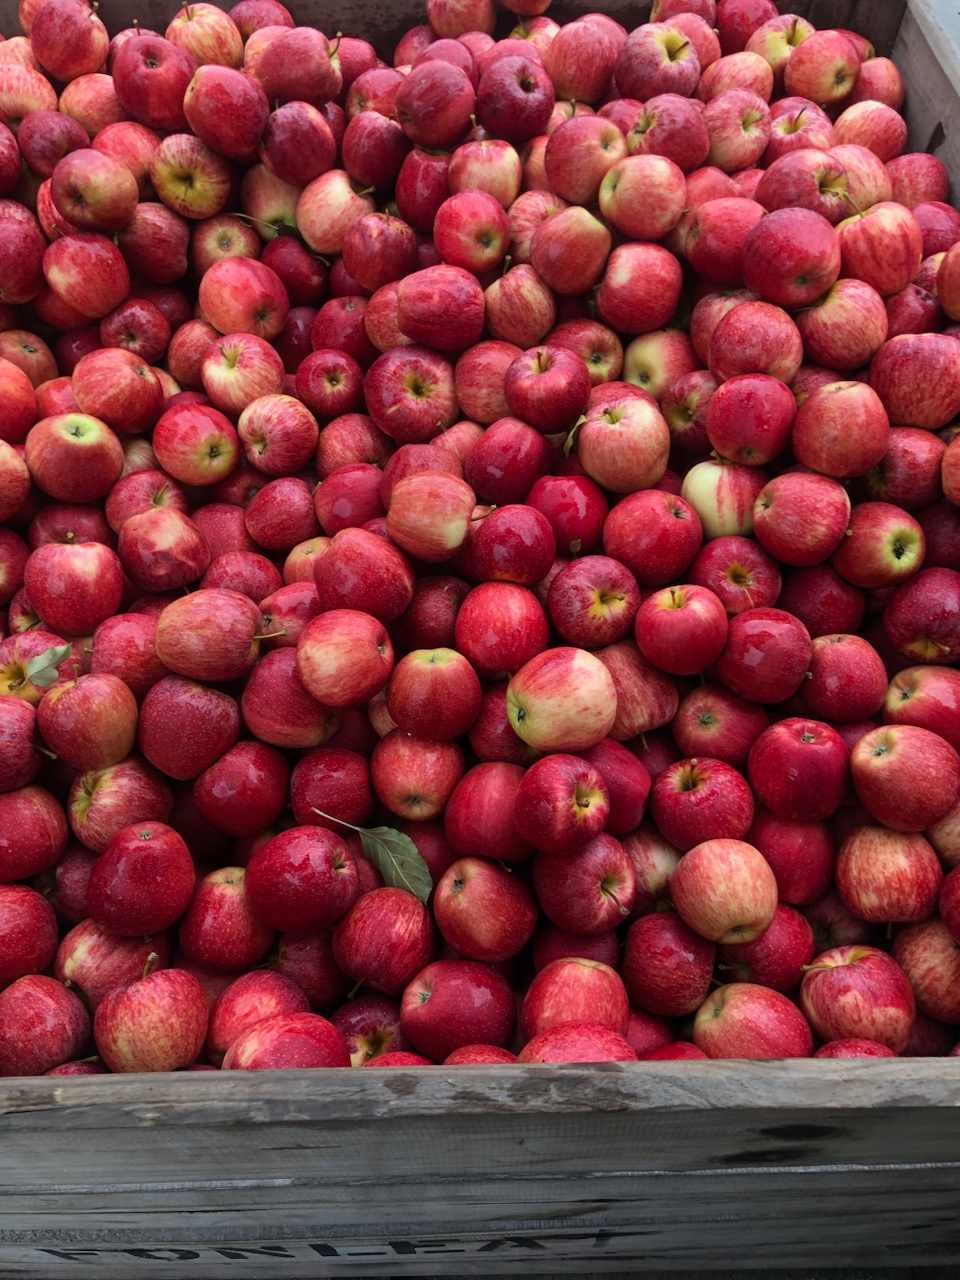 You are currently viewing New Season Royal Gala Apples – hooray!